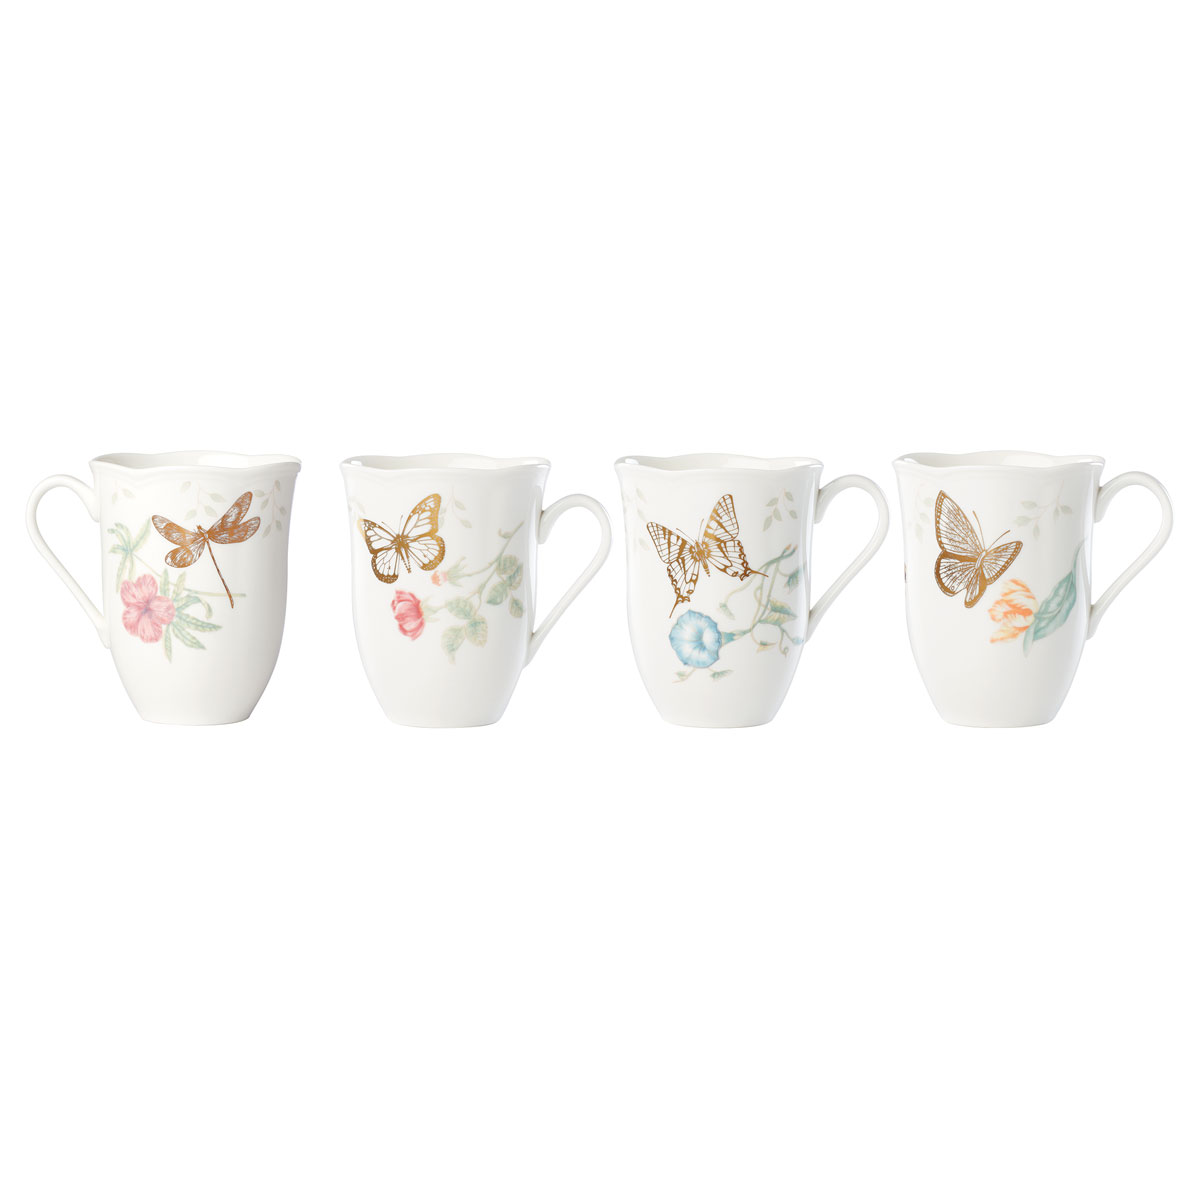 Lenox Butterfly Meadow Gold, 20th Anniversary Mug, Set of 4, Assorted